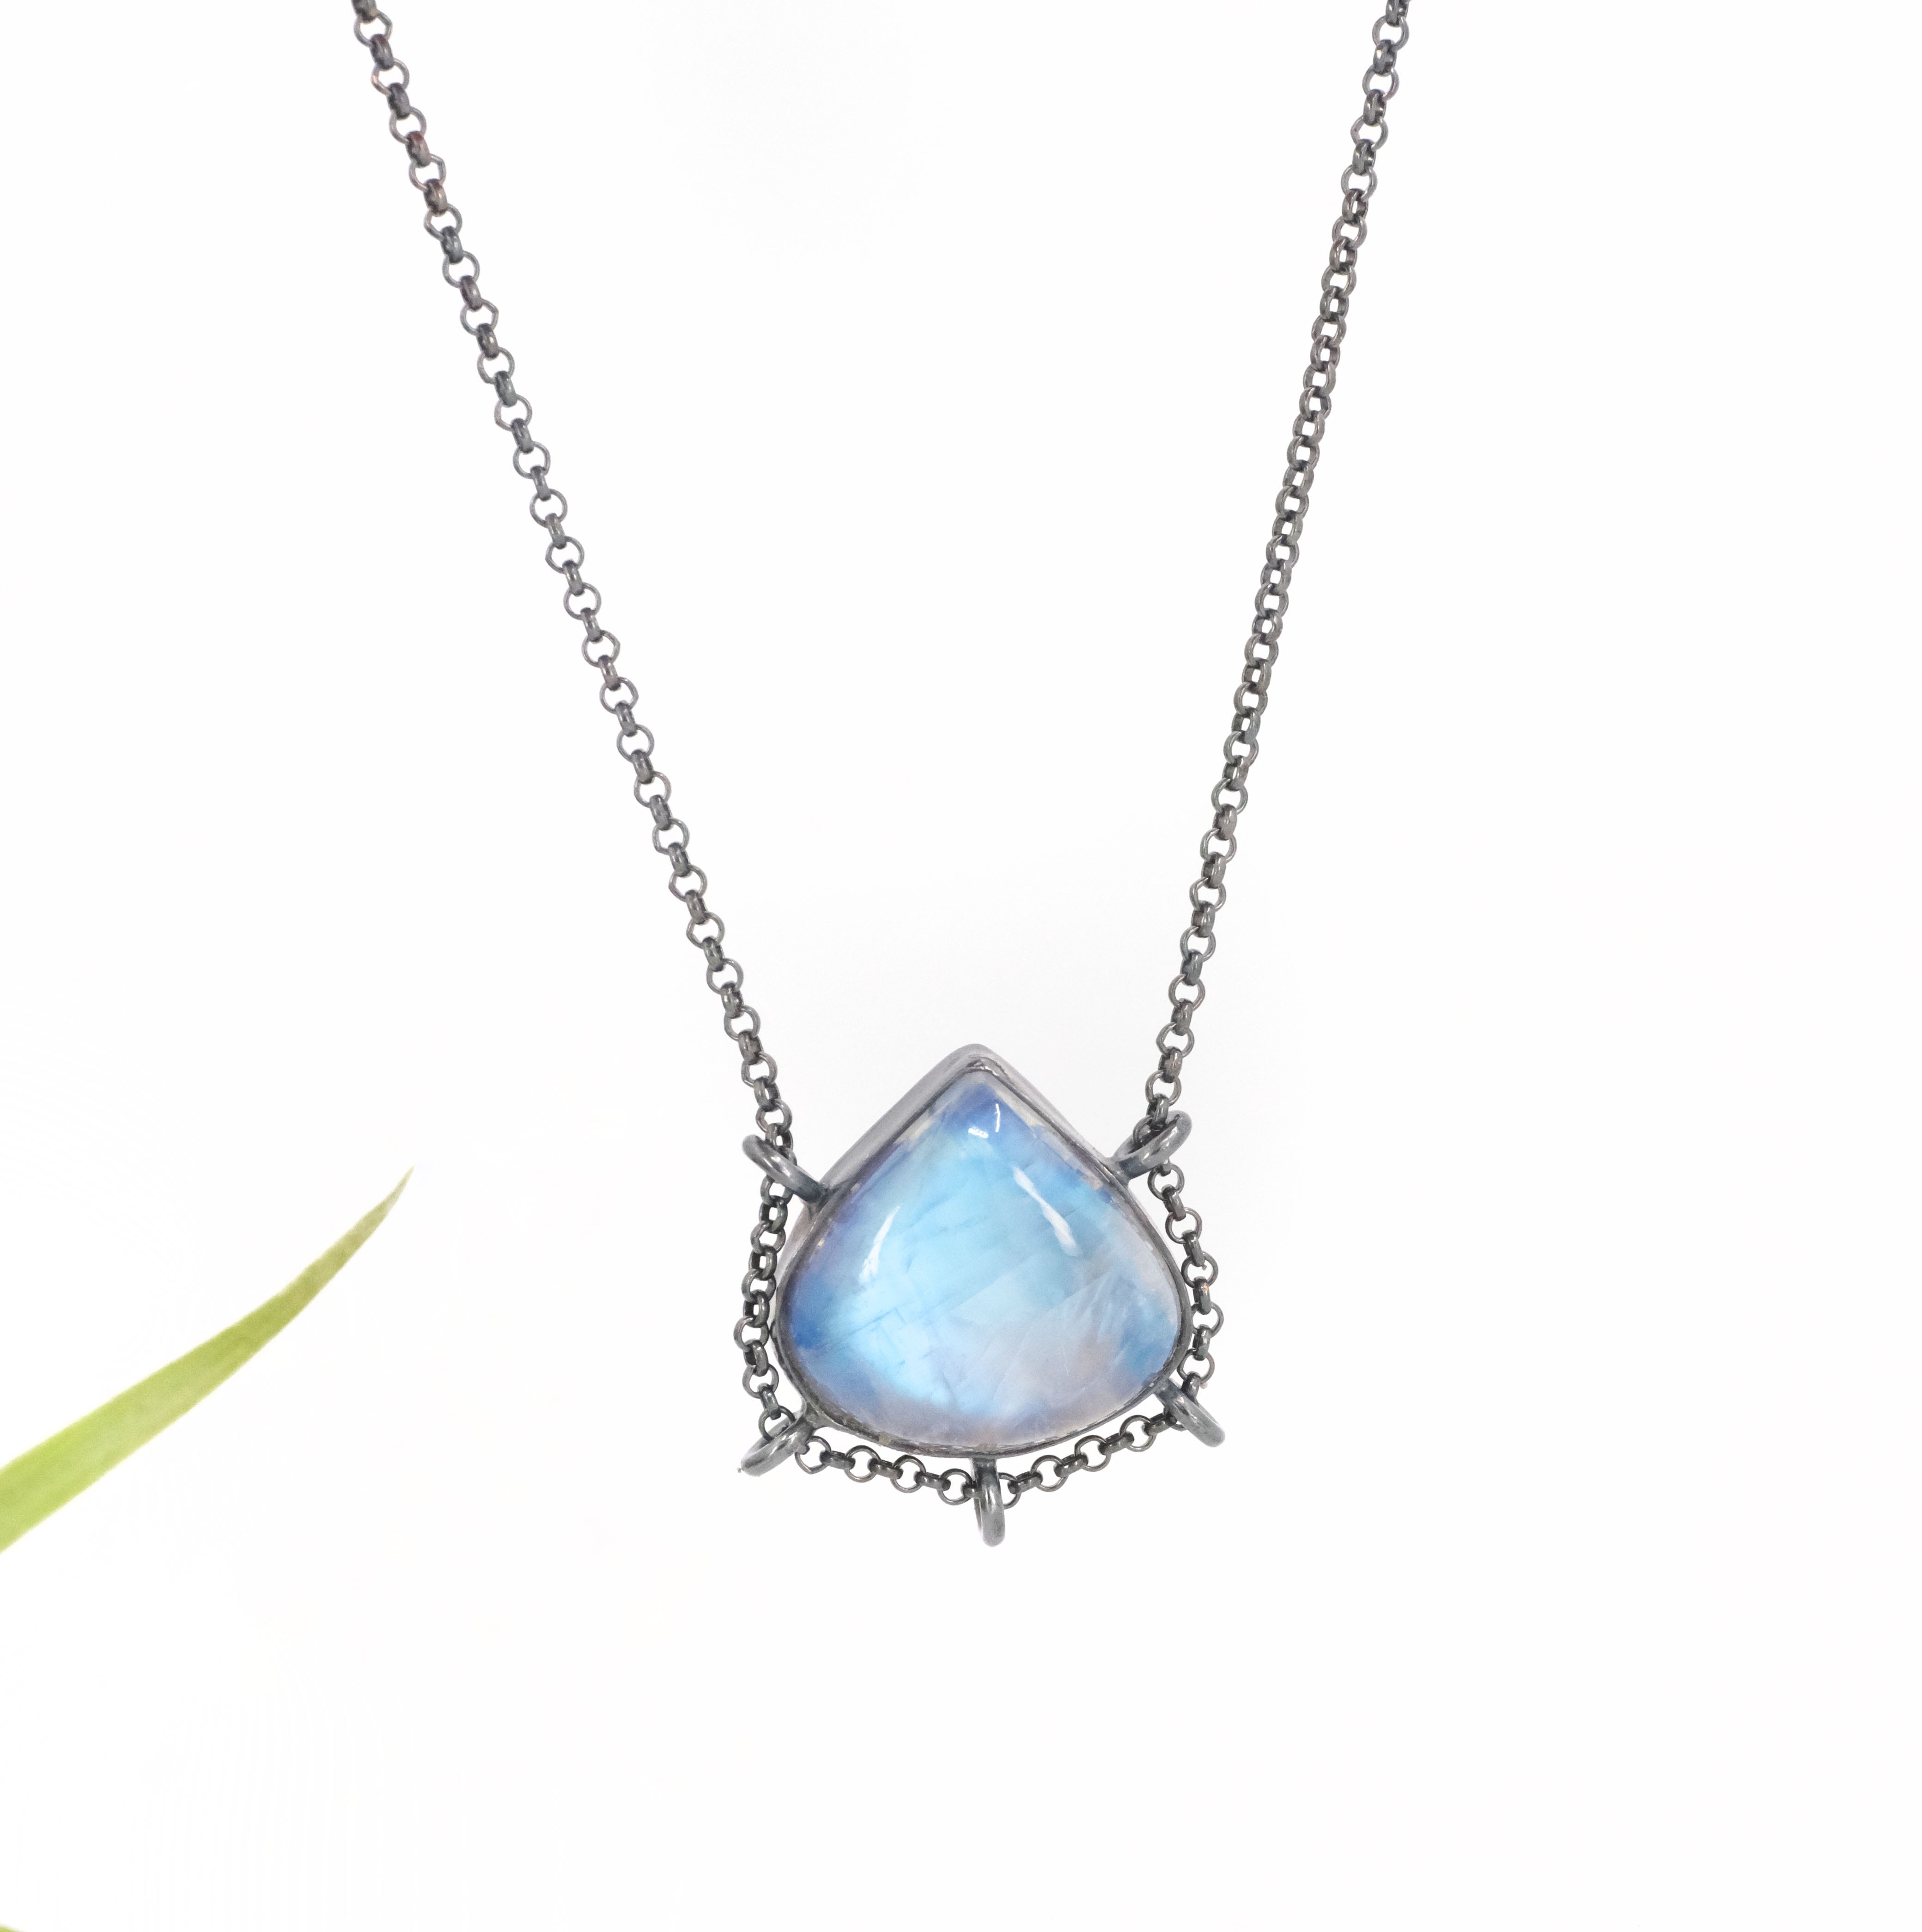 Rainbow Moonstone Path Necklace - One of a Kind